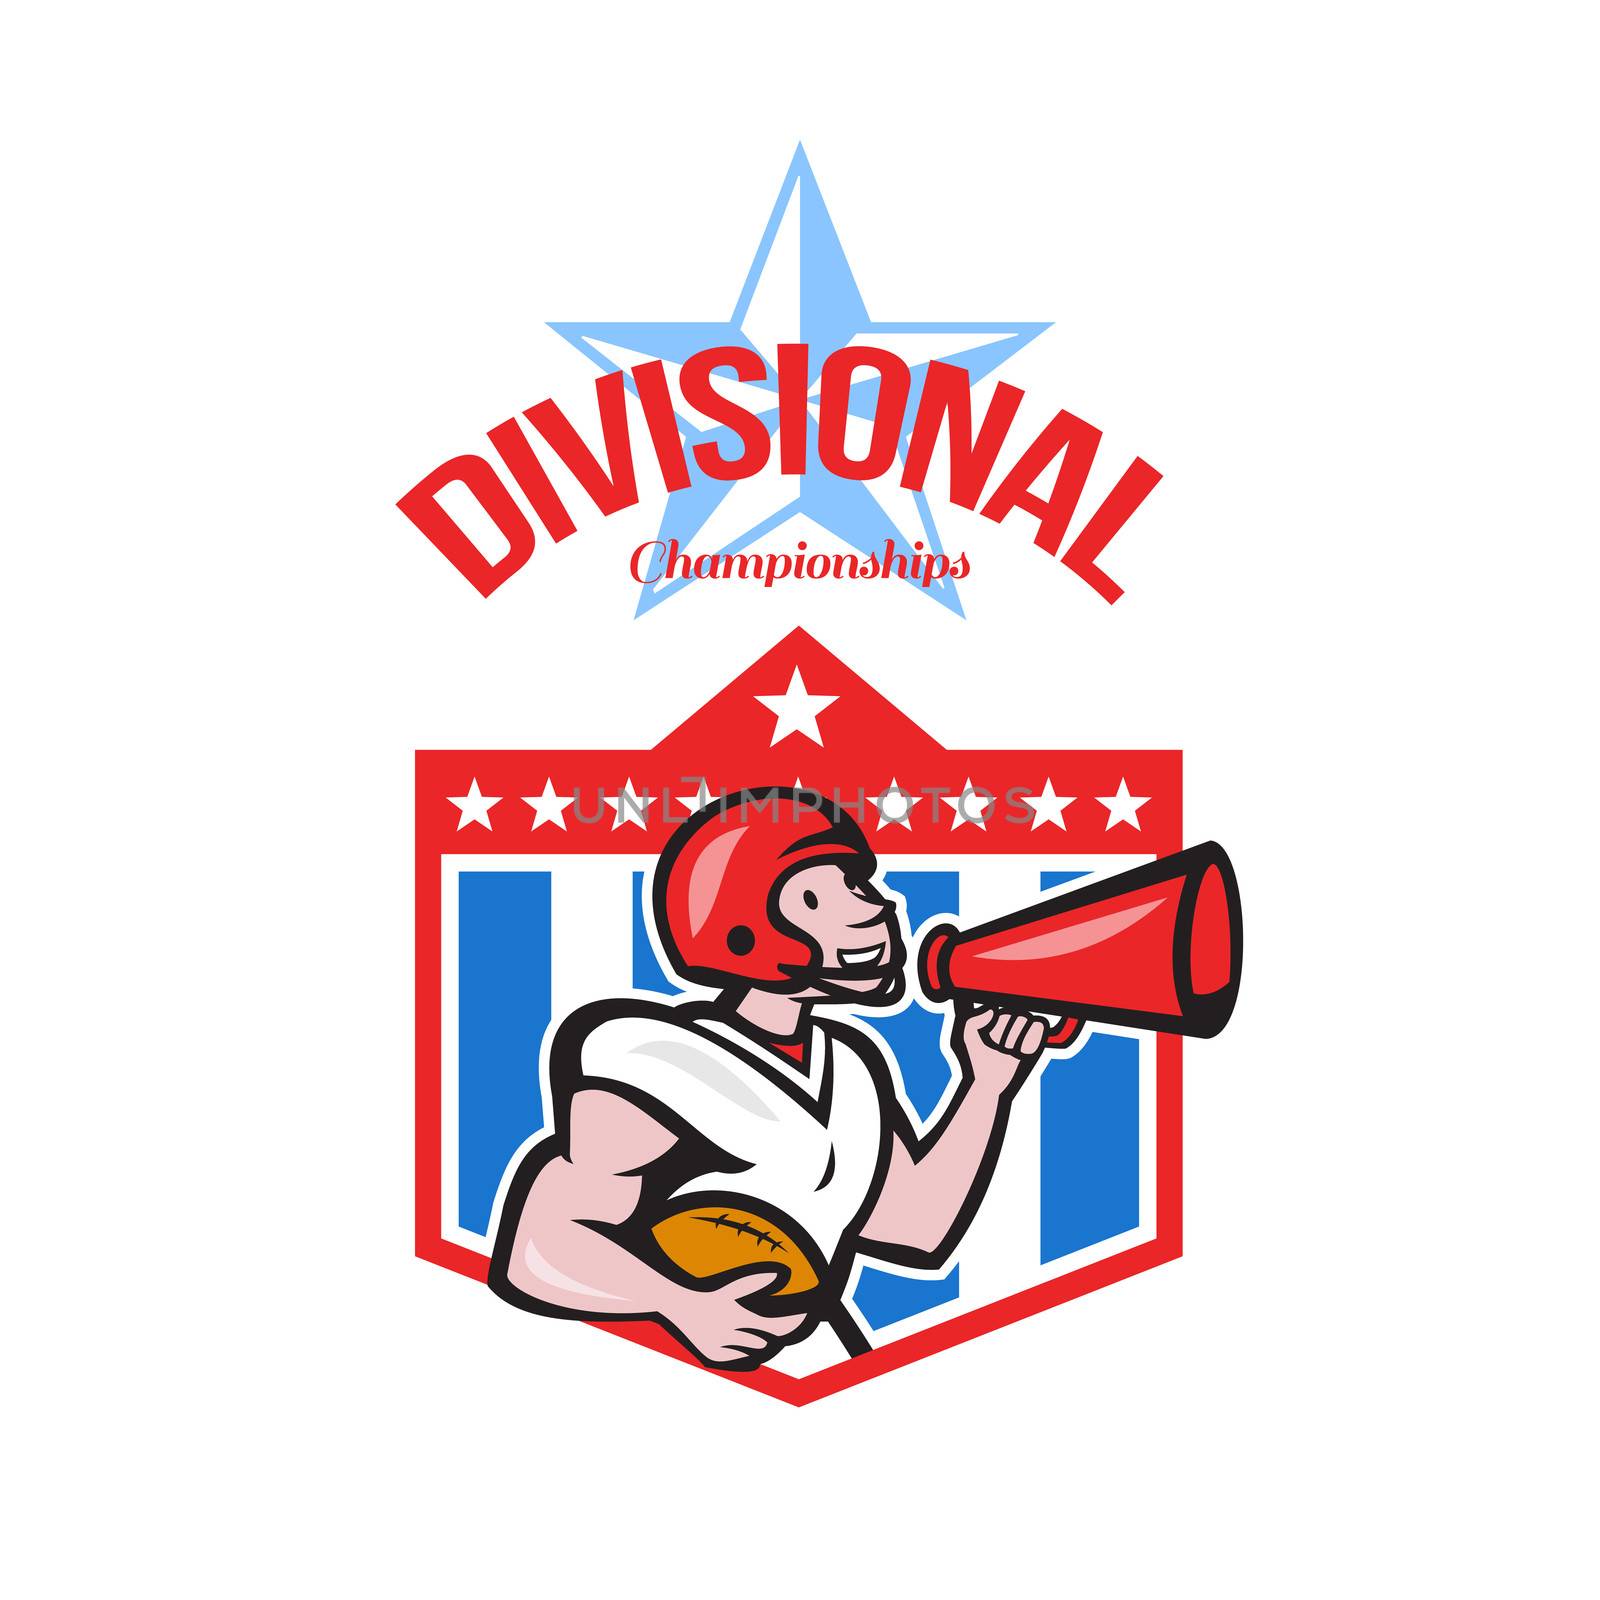 Illustration of an american football gridiron quarterback player holding bullhorn blowhorn shouting facing side set inside crest shield with stars in background done in cartoon style with words Divisional Champions.